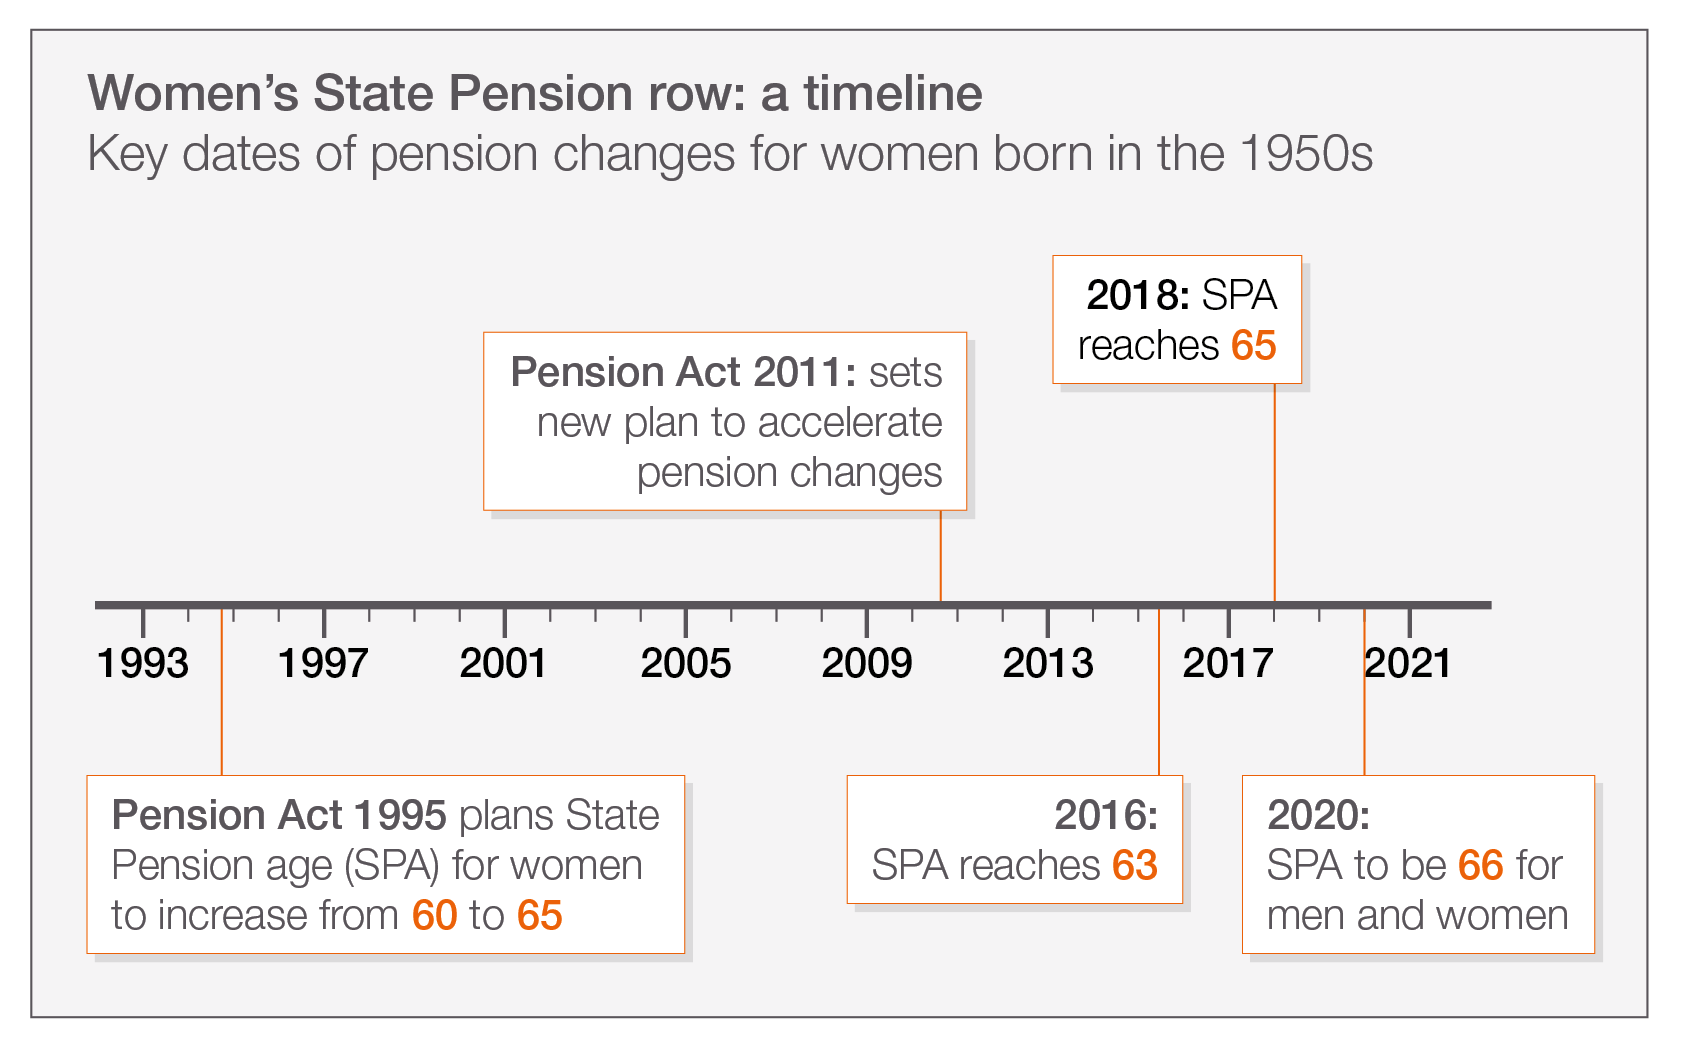 Timeline of key dates in the women's state pension row. 1995 – Pension act plans state pension age for women to increase from 60 to 65. 2011 – New act accelerates pension changes. 2016 – State pension age for women increased to 63. 2018 – State pension age increased to 65. 2020 – State pension age to be 66 for men and women.